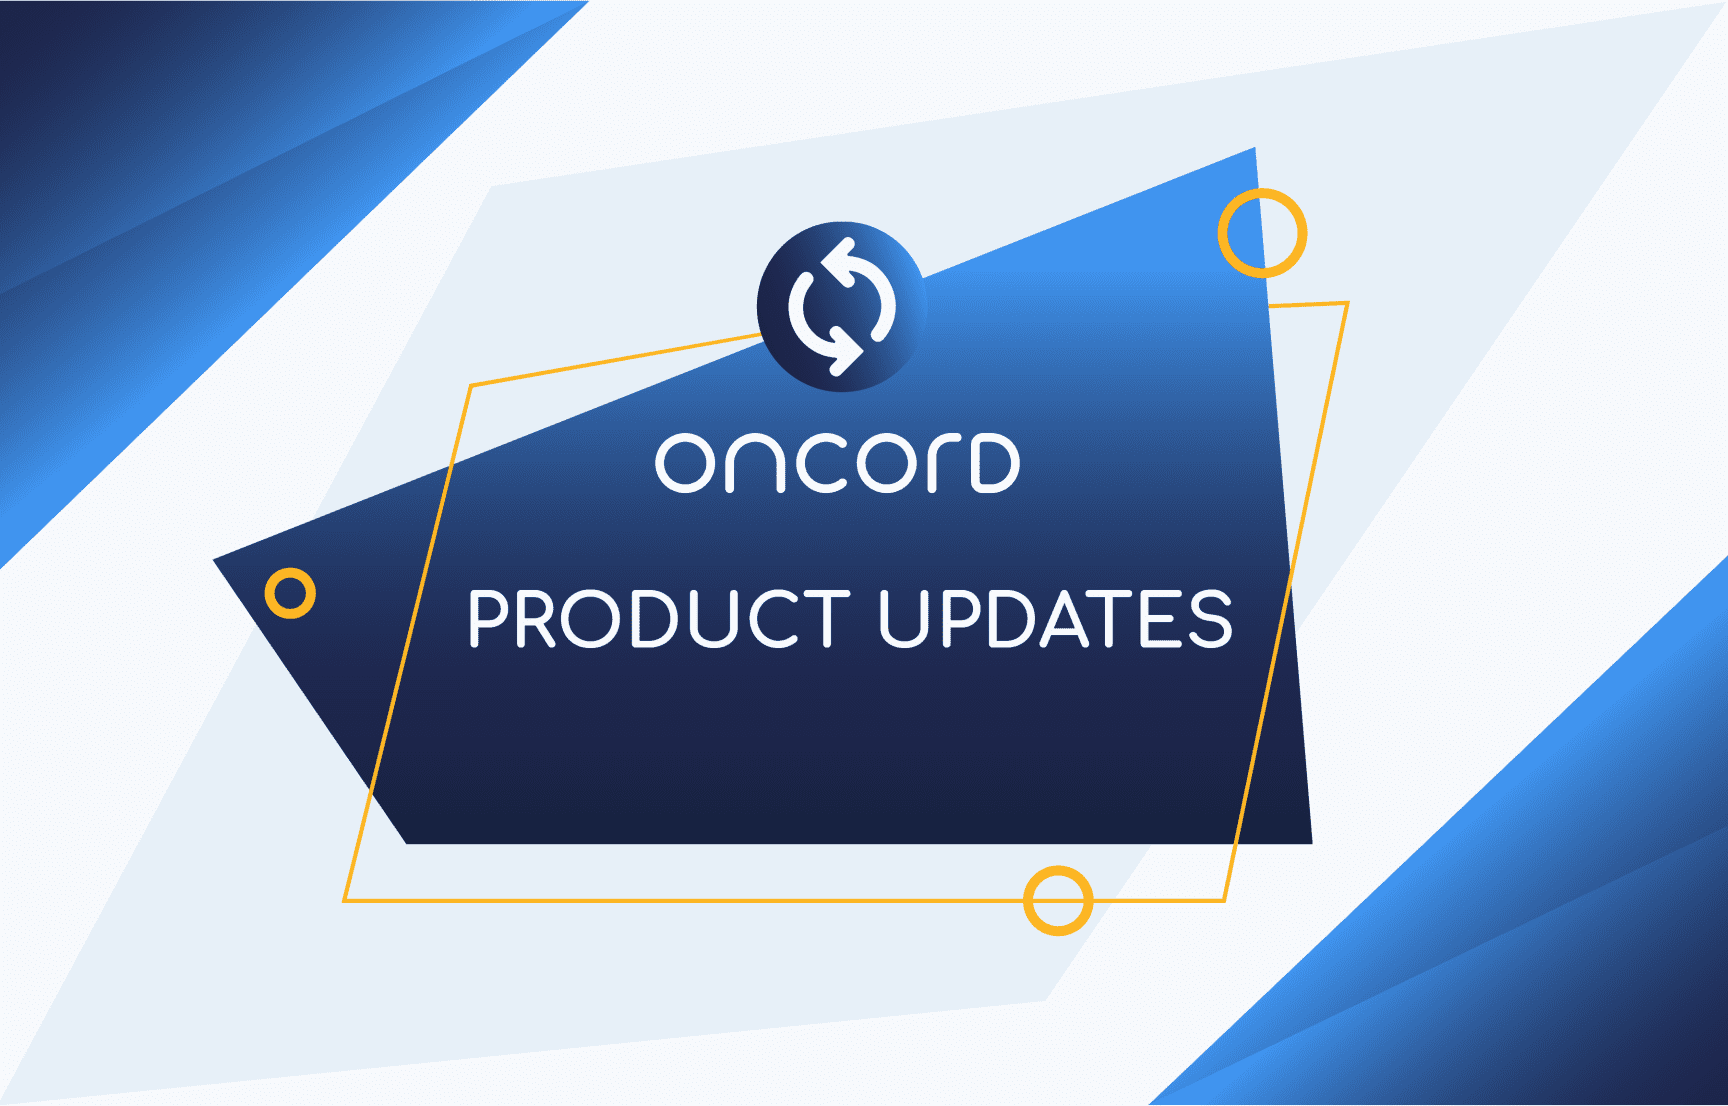 The Latest Oncord Updates & New Features